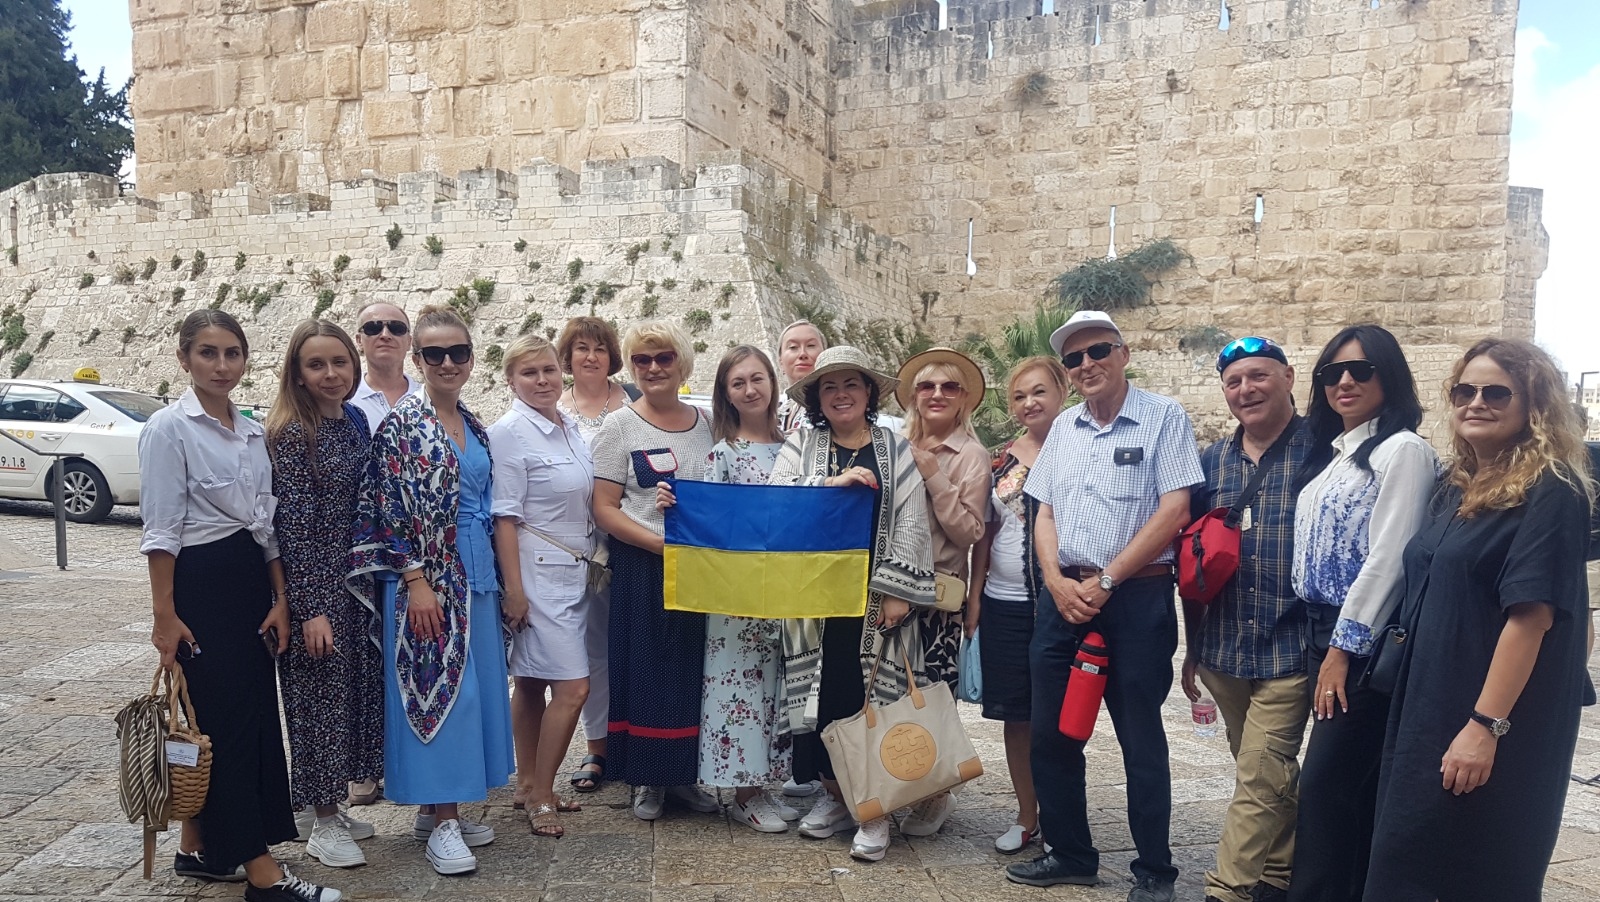 Dr. Avi Ramot, fourth from right, giving an accessibility tour of Jerusalemâ€™s Old City to visiting officials from Ukraine, September 6, 2022. Photo courtesy of SHEKEL